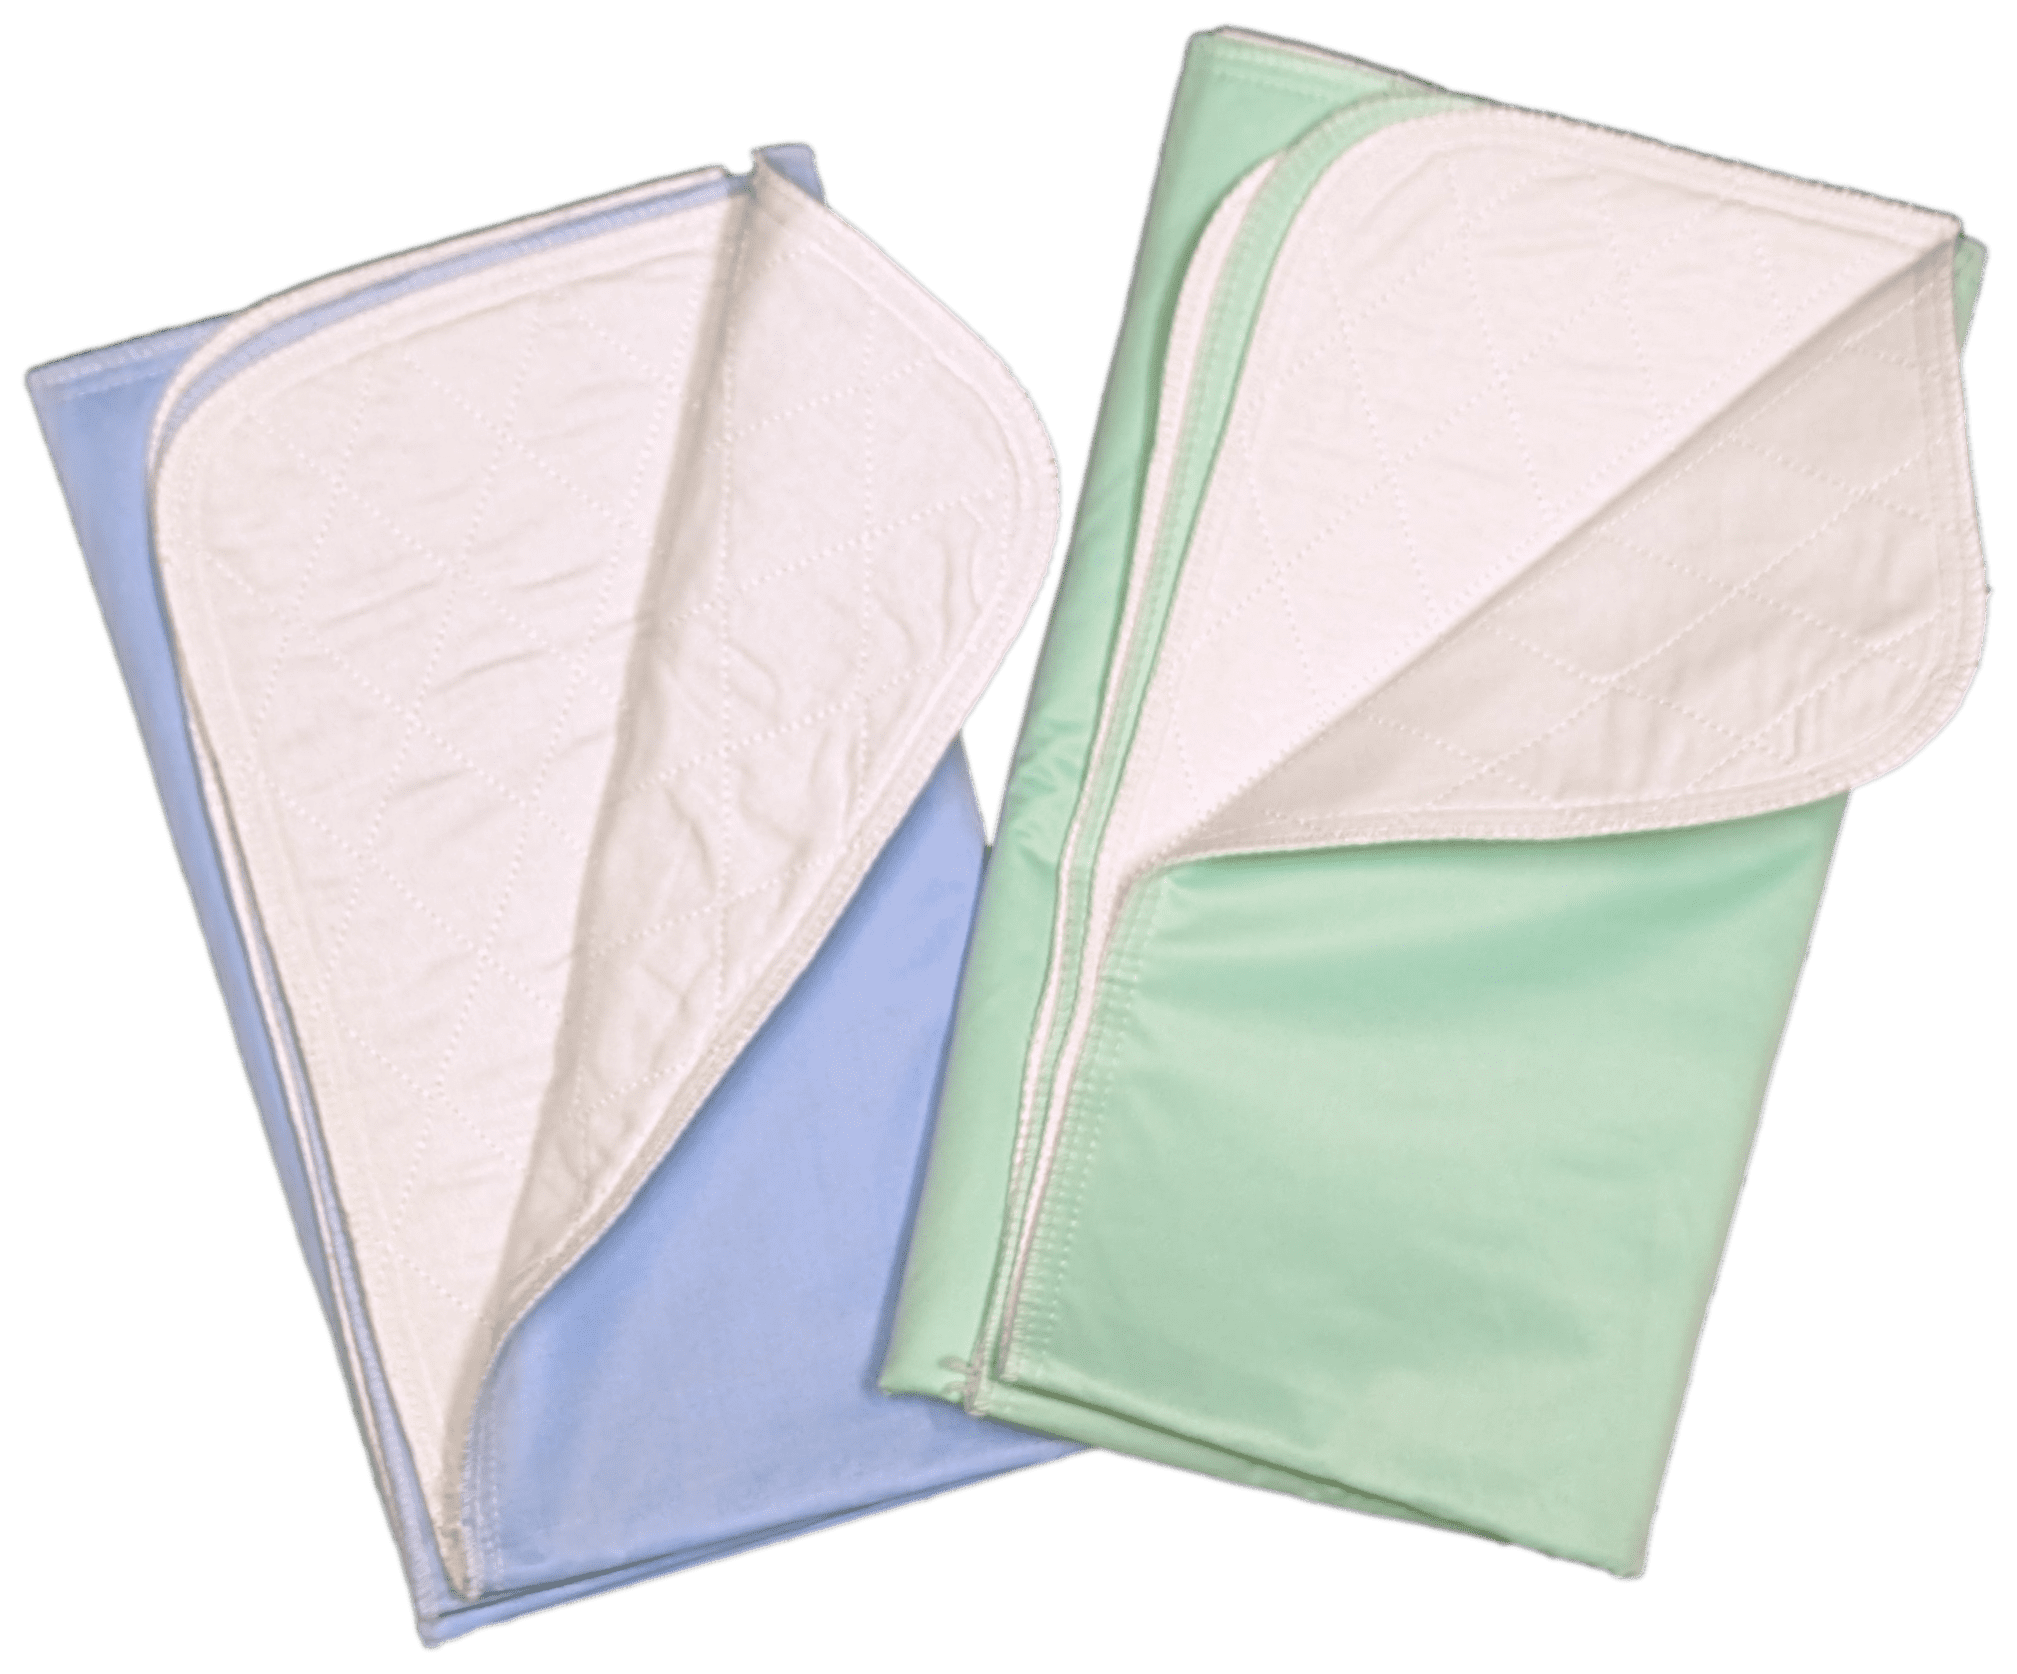 36 x 54 Reusable Underpad with 4-Layer Protection 3 Pack + Vakly Incontinence